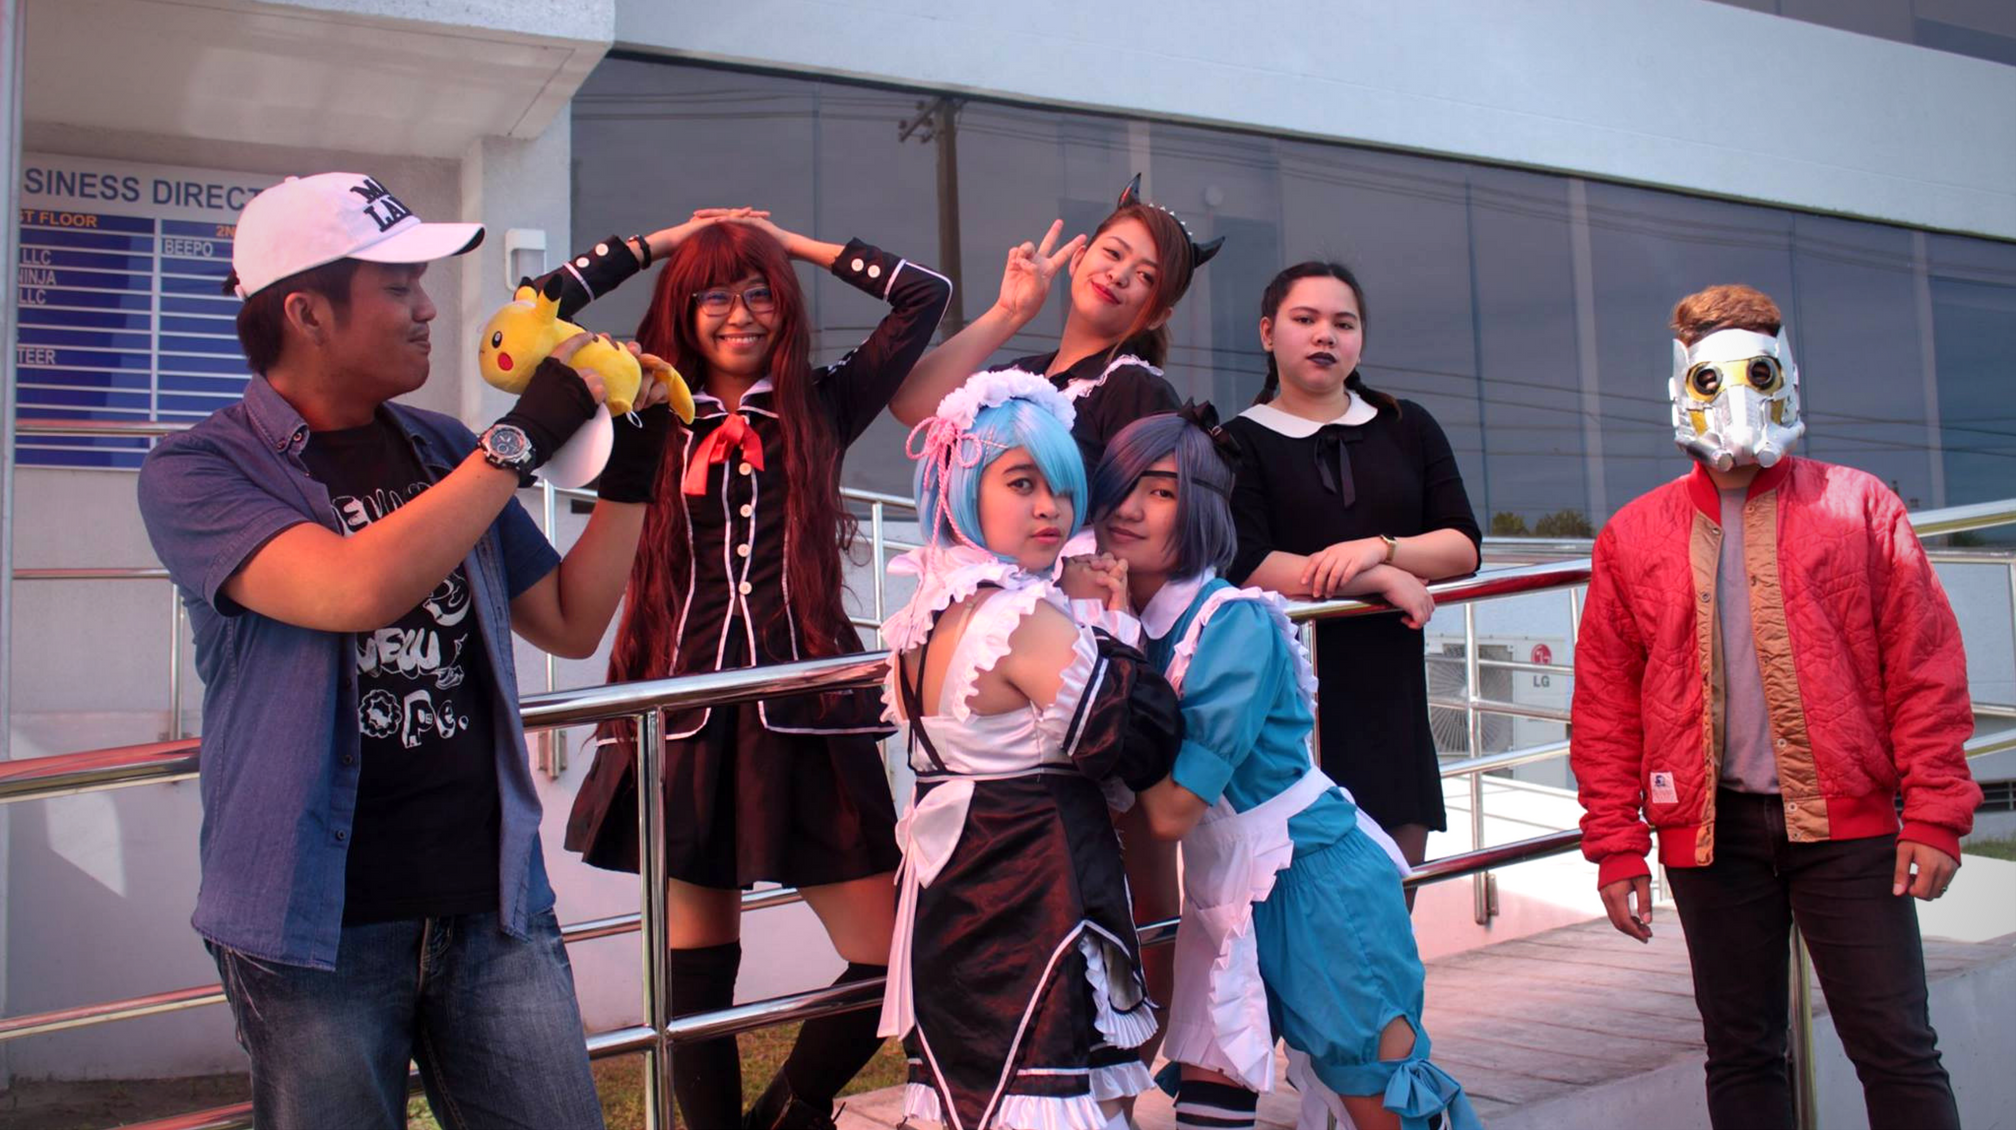 Photo of Beepo employees on their cosplay costume.